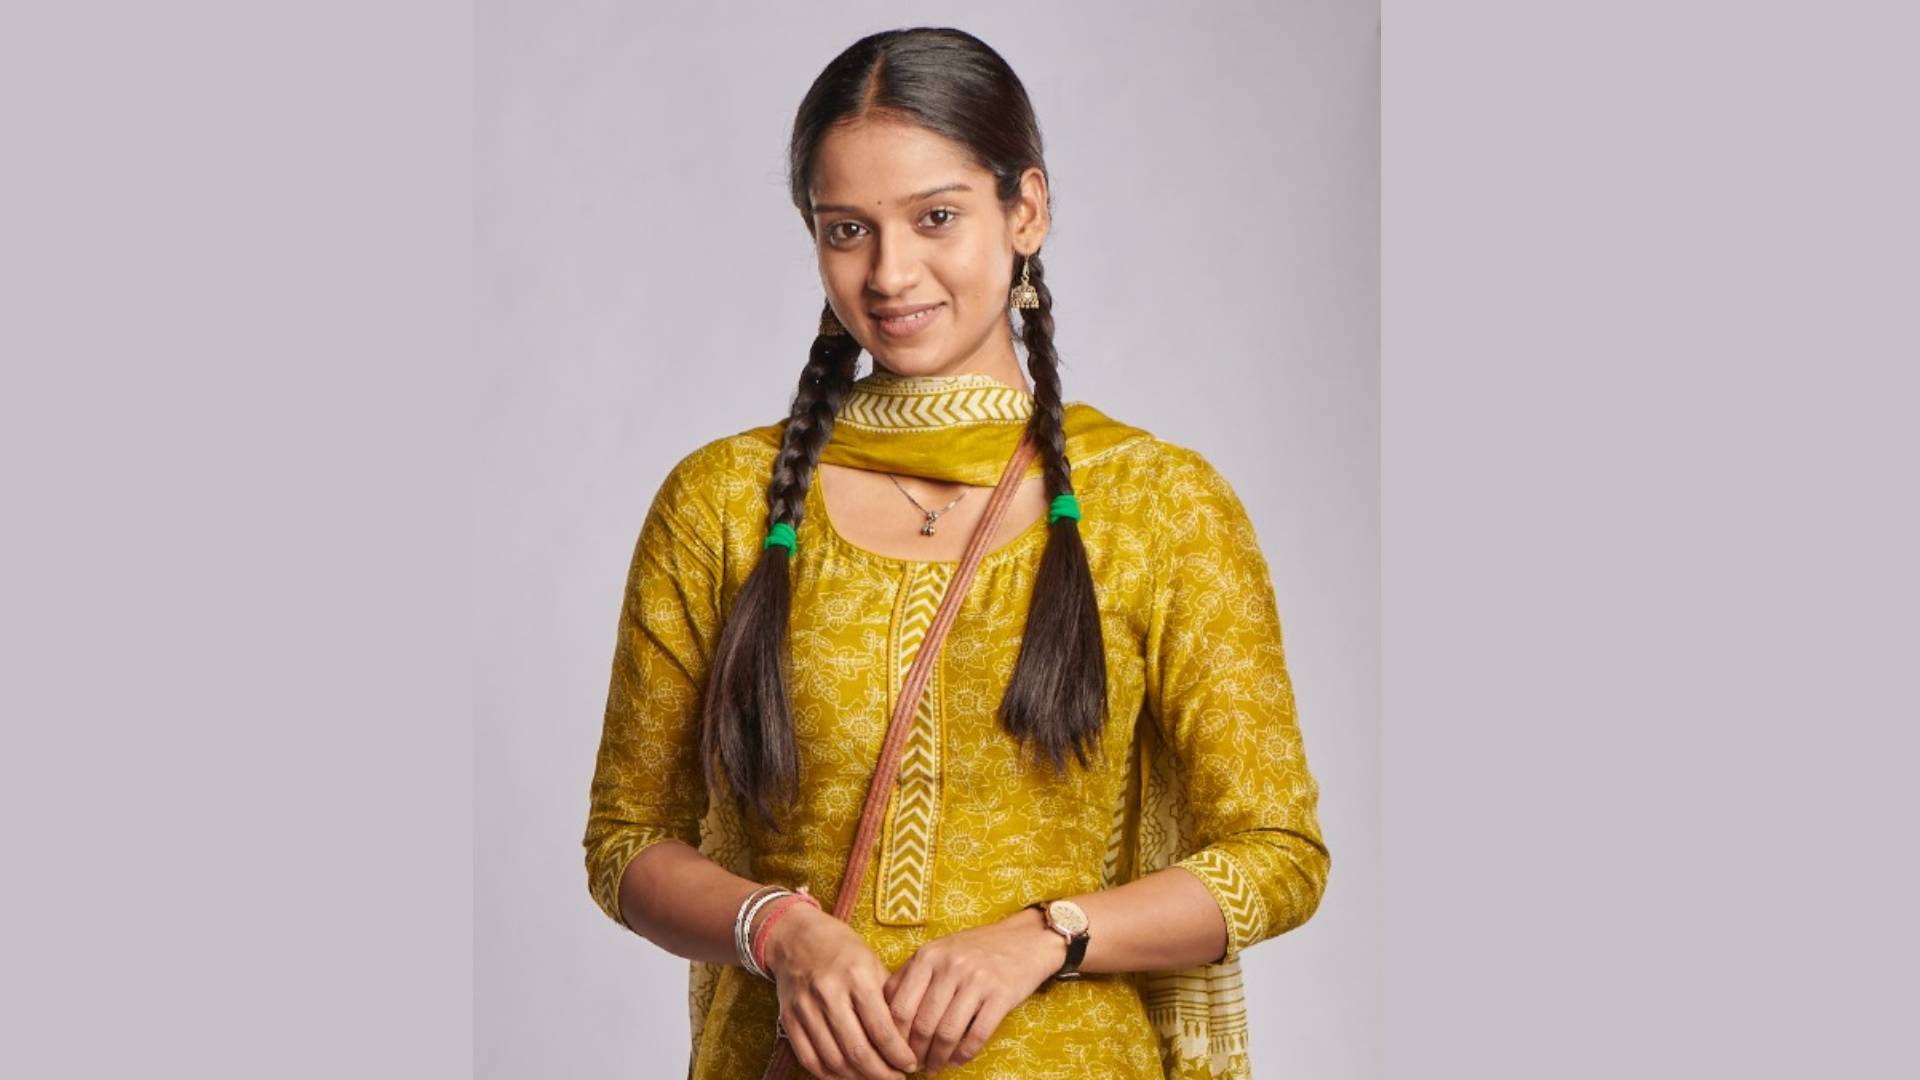 Prerna Singh, aka Sajeeri, from the Star Plus show Meetha Khatta Pyaar Hamara, gives us a glimpse of her character and much more!